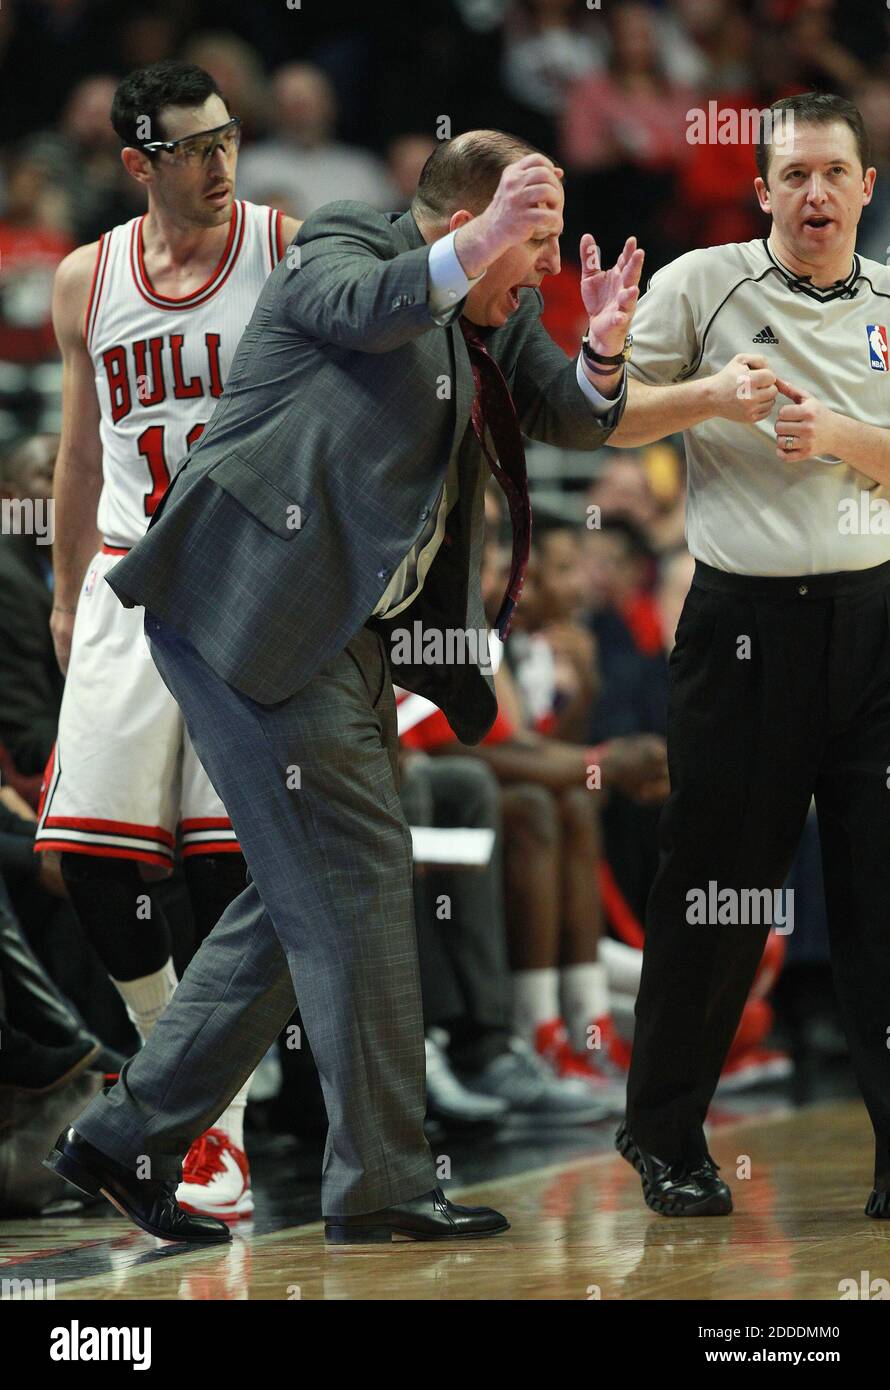 NO FILM, NO VIDEO, NO TV, NO DOCUMENTARY - Chicago Bulls head coach Tom Thibodeau gestures to the referee how Kirk Hinrich, left, didn't foul the Brooklyn Nets' Deron Williams, not pictured, in the fourth quarter at the United Center in Chicago, IL, USA on December 10, 2014. Photo by John J. Kim/Chicago Tribune/TNS/ABACAPRESS.COM Stock Photo